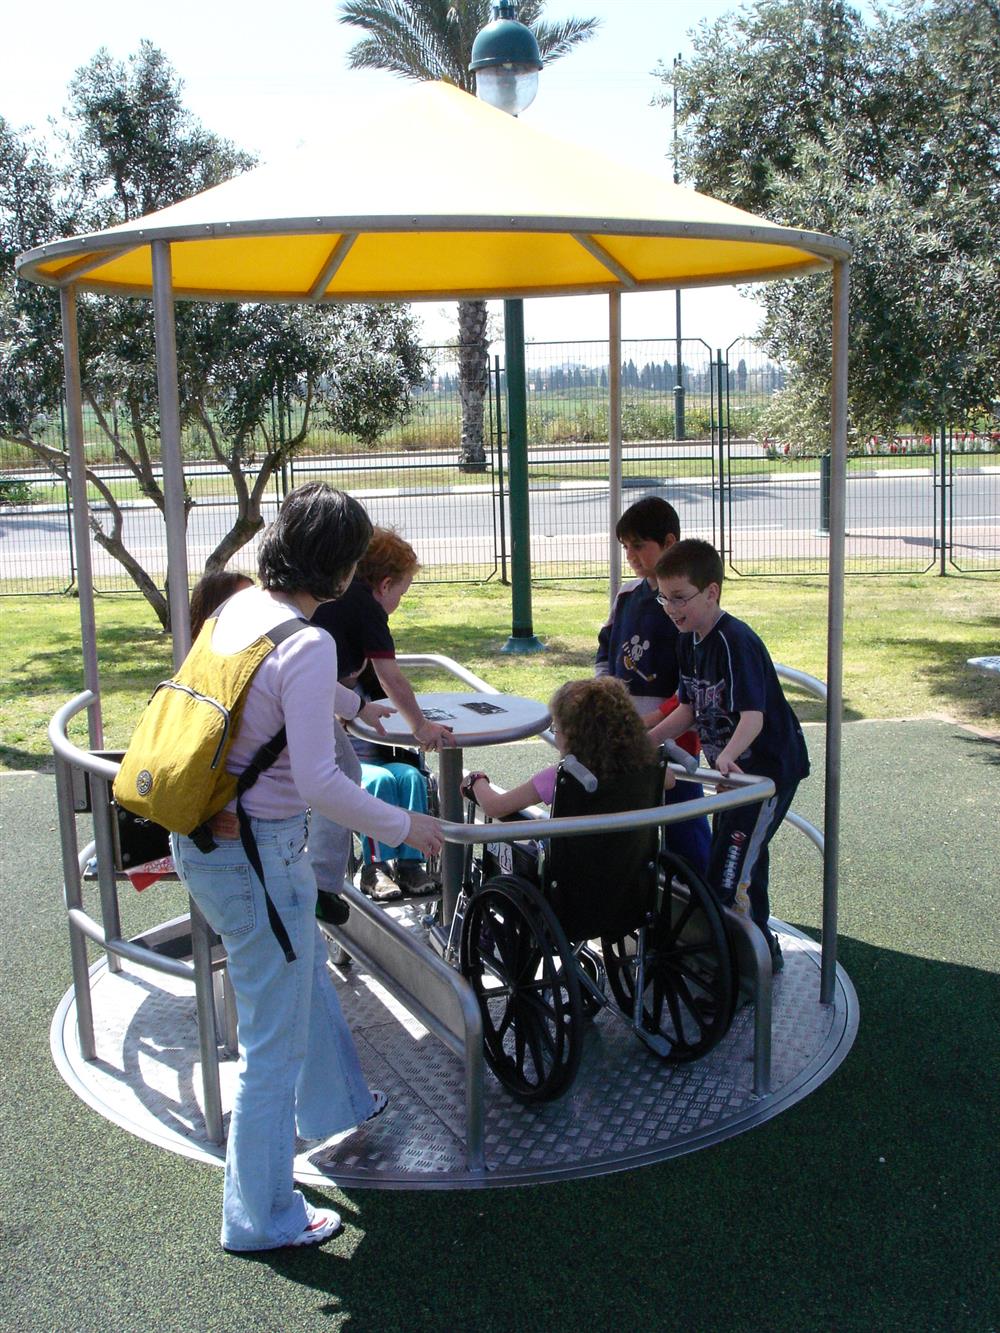 Children with and without disabilities playing on a playground with accessibility features.